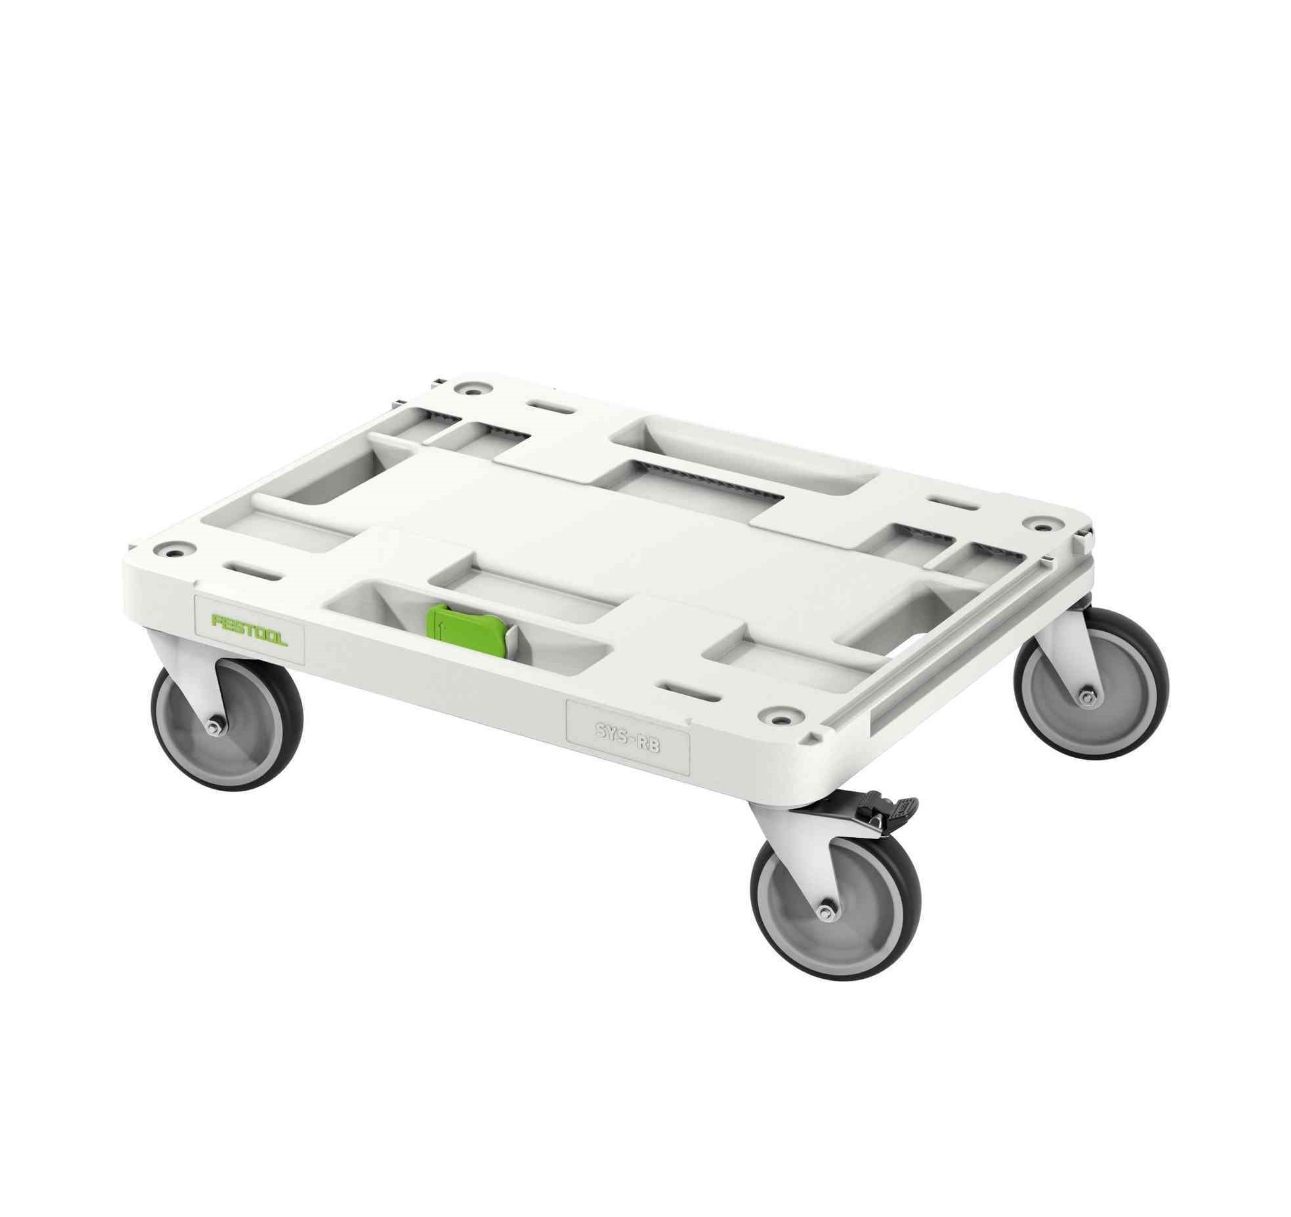 Festool Roll Board for Systainer3 and Systainer T-LOC (204869)